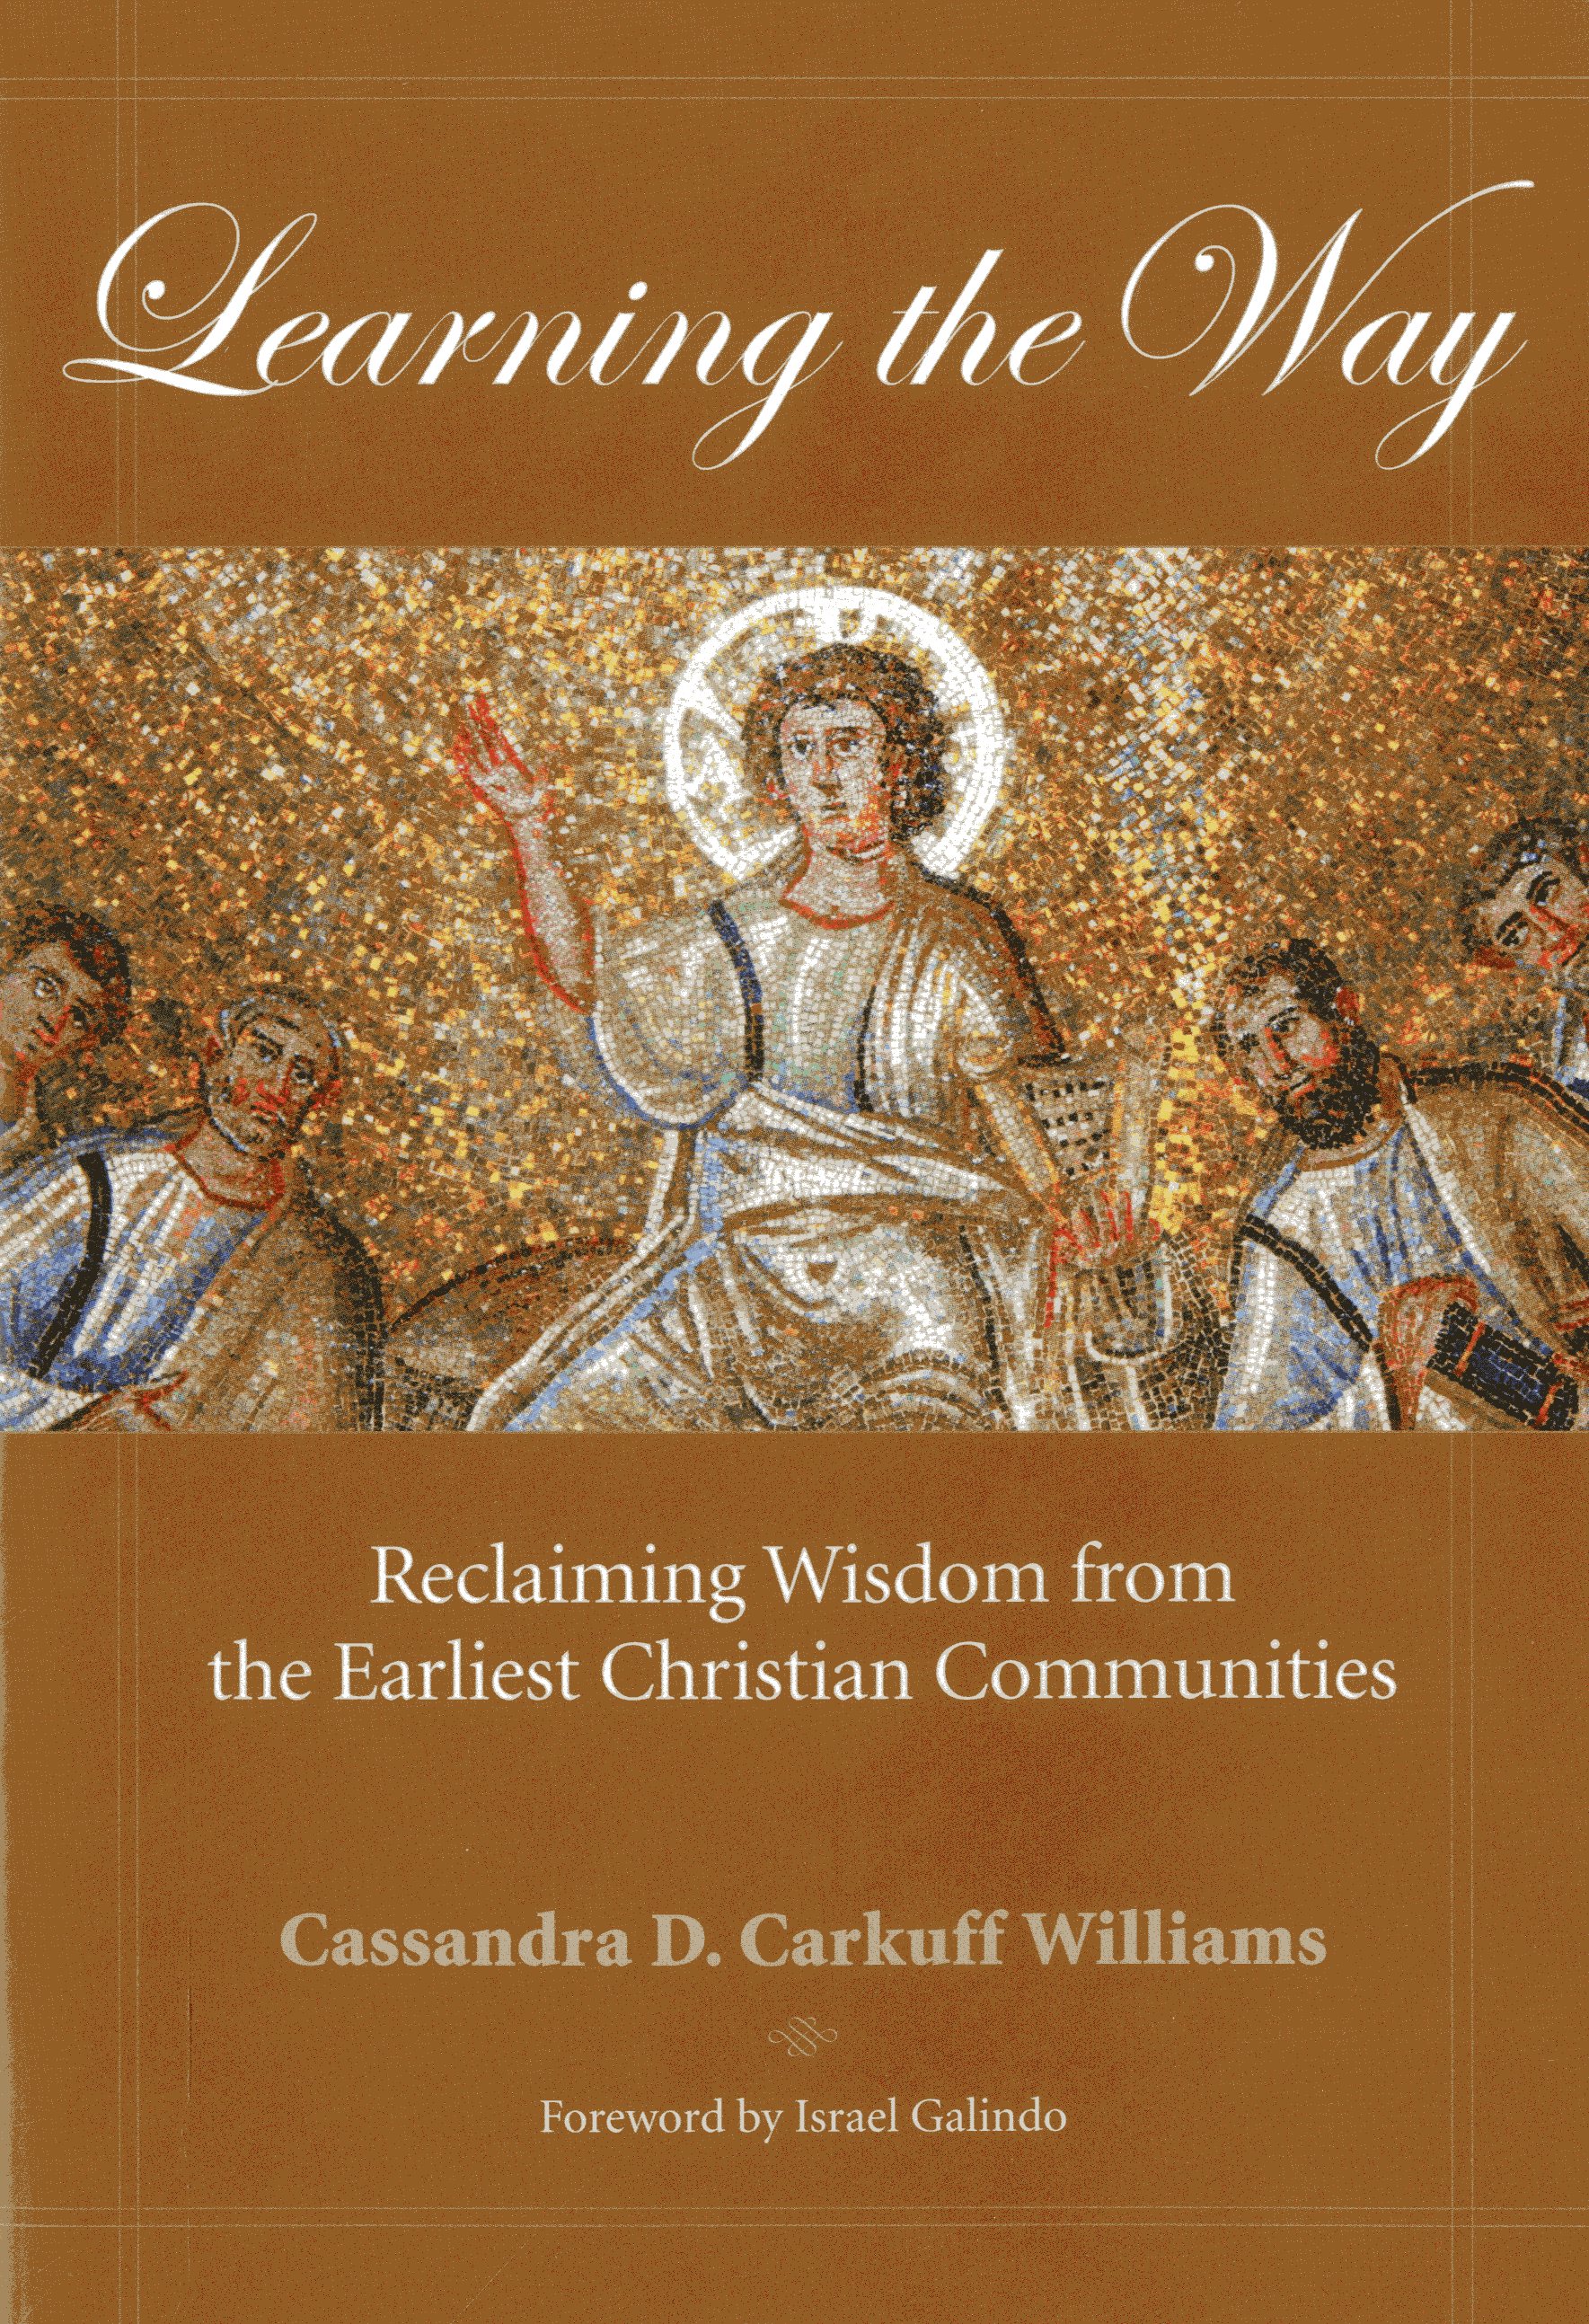 Learning the Way: Reclaiming Wisdom from the Earliest Christian Communities